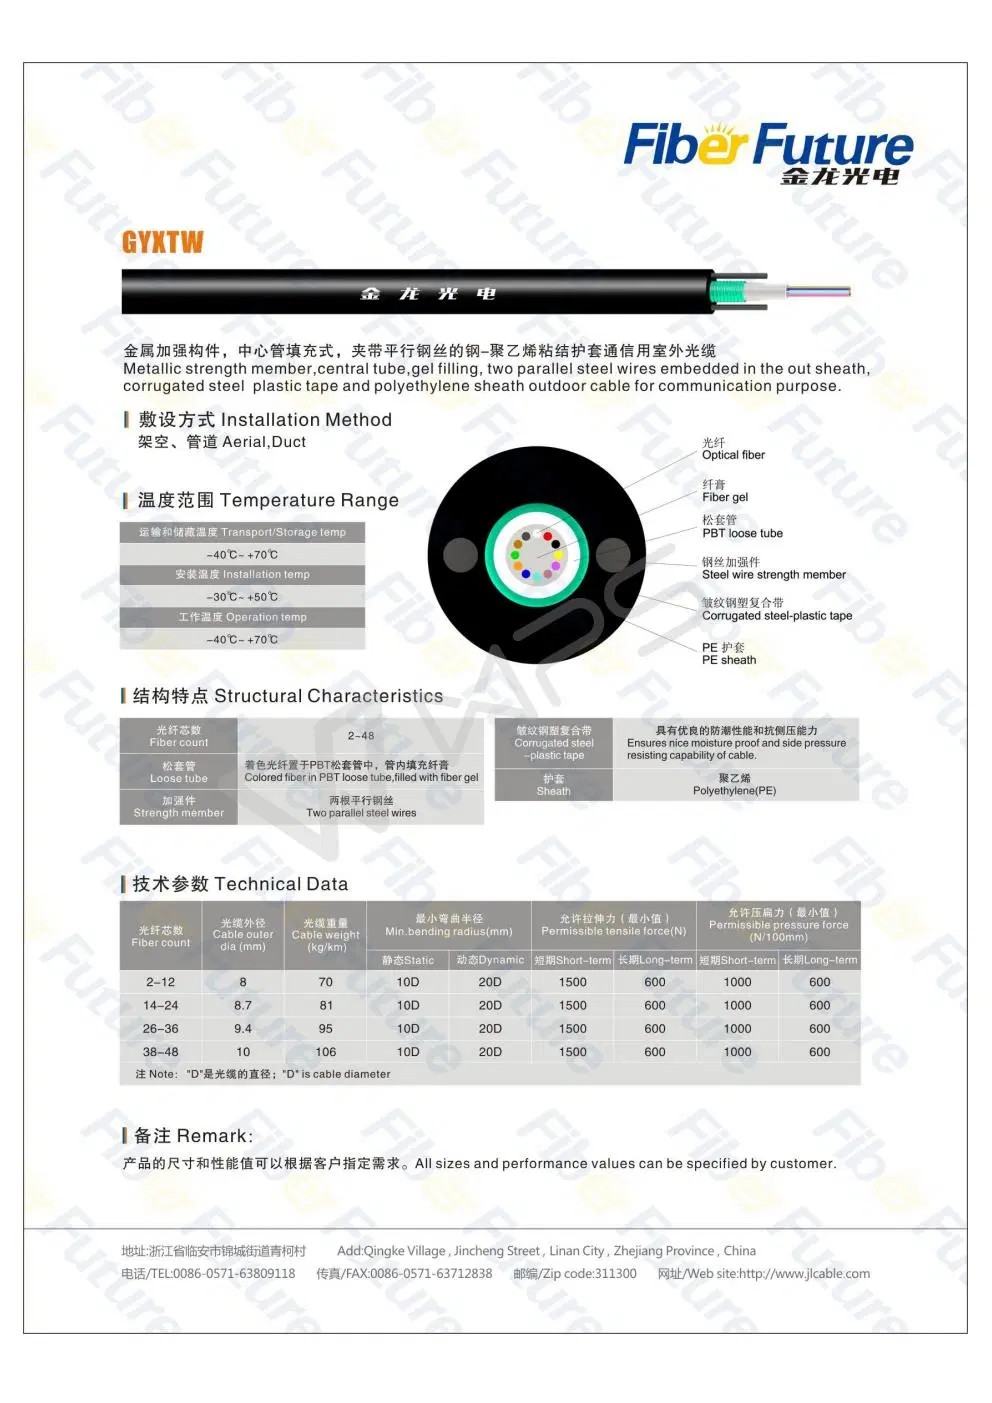 Aerial Good Quality Multimode 2-48 Fiber Cable (GYXTW)